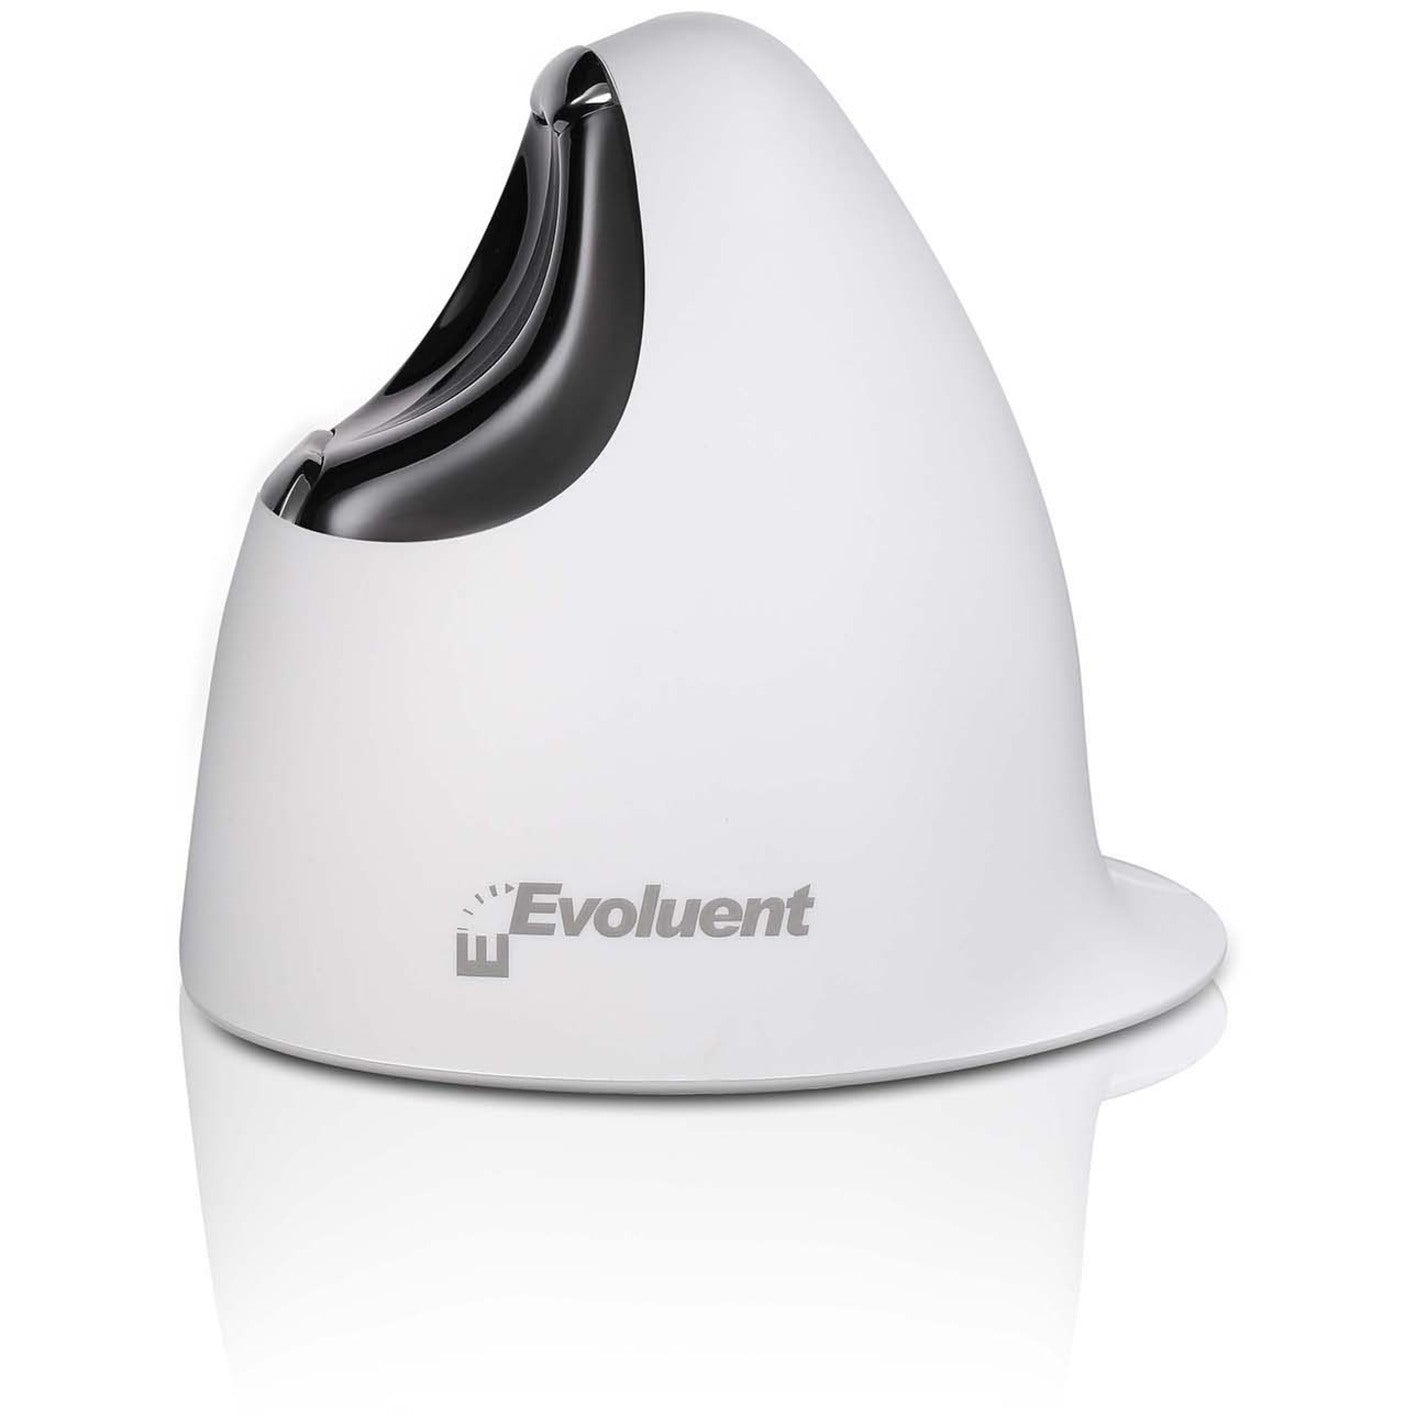 Evoluent VM4RB VerticalMouse 4 Right Bluetooth, Ergonomic Fit, 2600 dpi, 6 Programmable Buttons